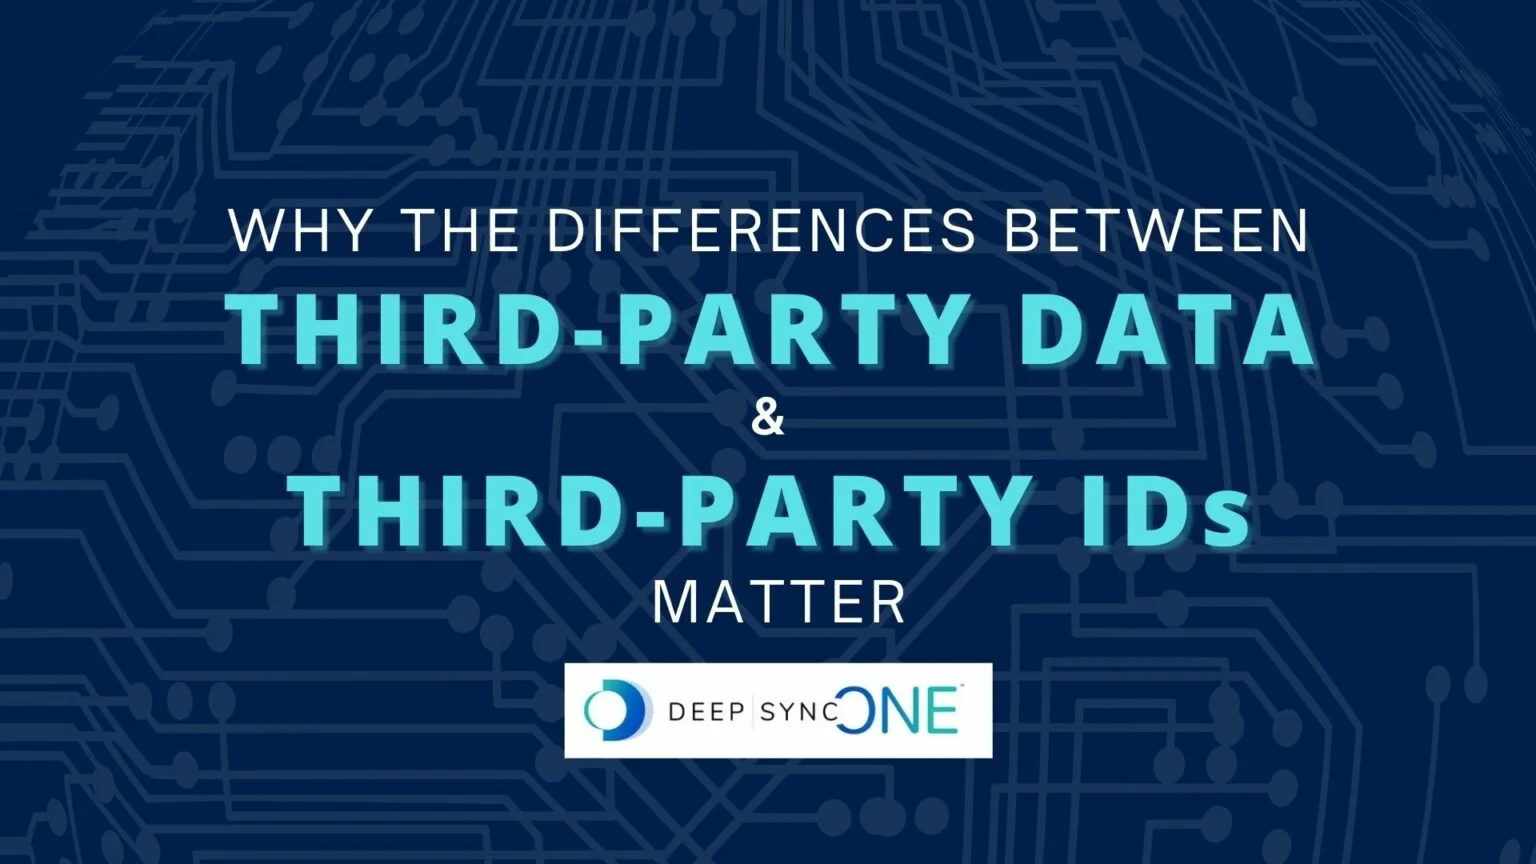 Why The Differences Between Third-Party Data & Third-Party IDs Matter